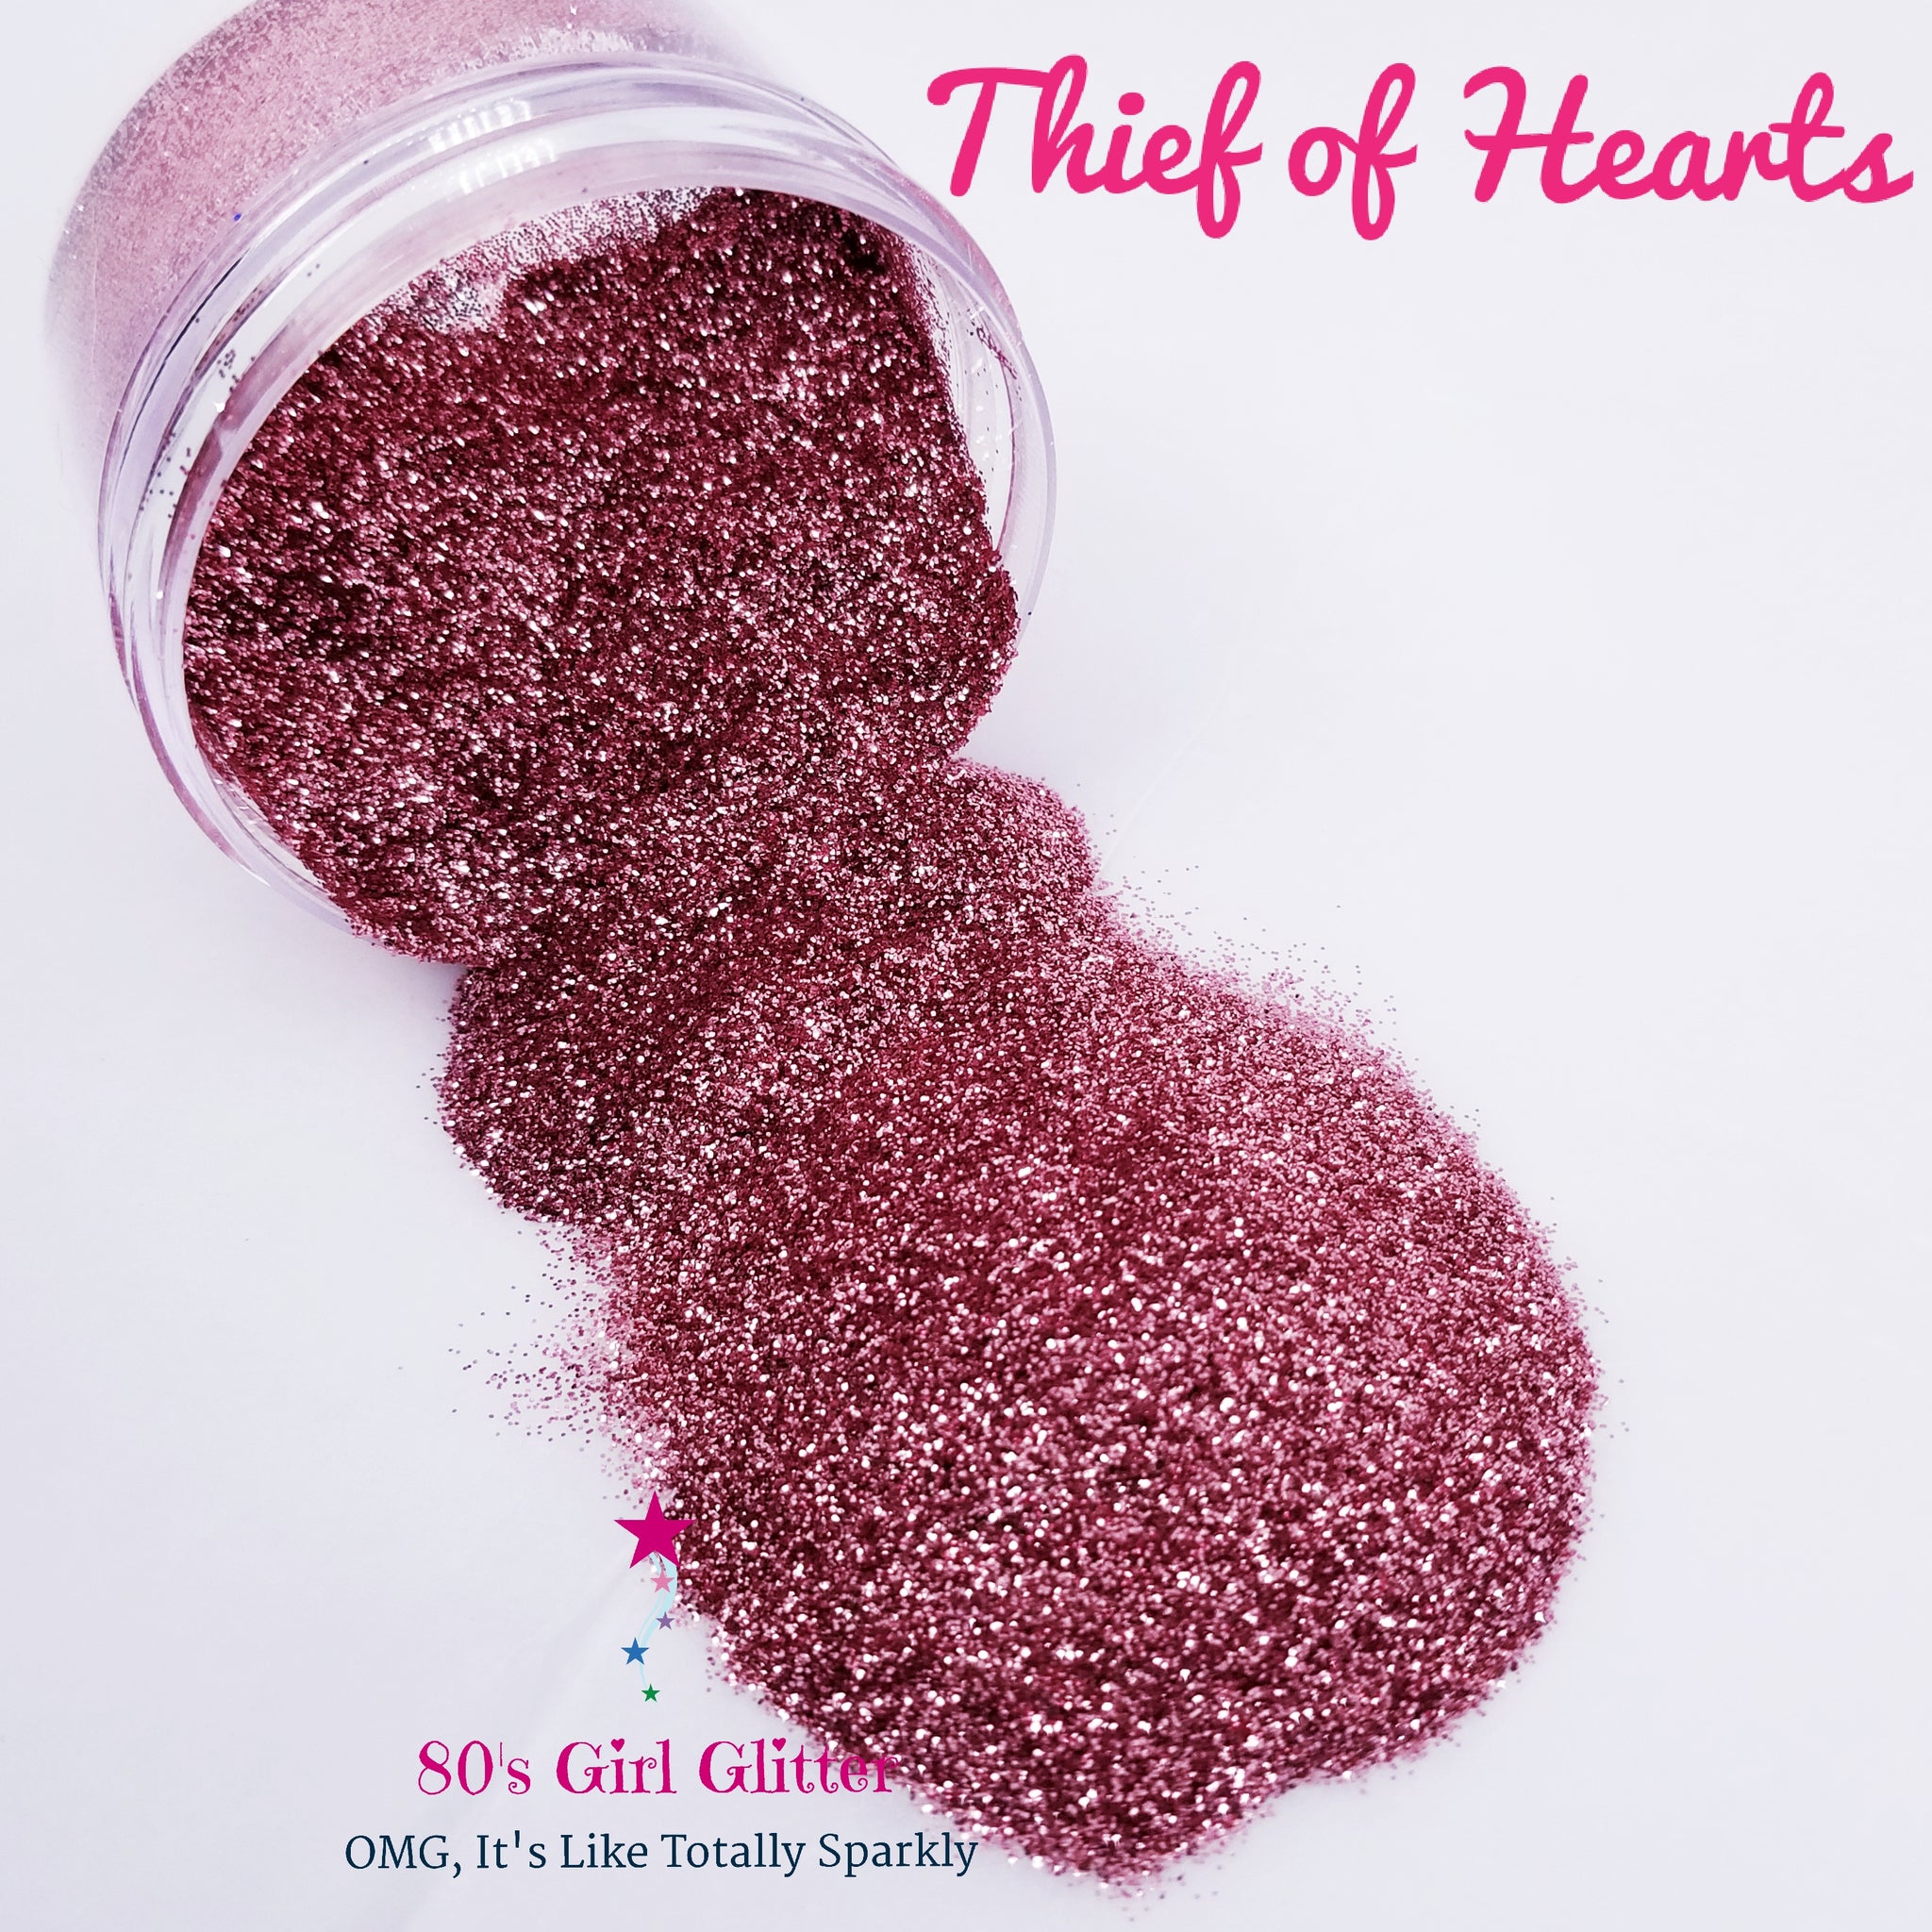 Thief of Hearts - Glitter - Pink Glitter - Dusty Pink and Silver Ultra –  80's Girl Glitter